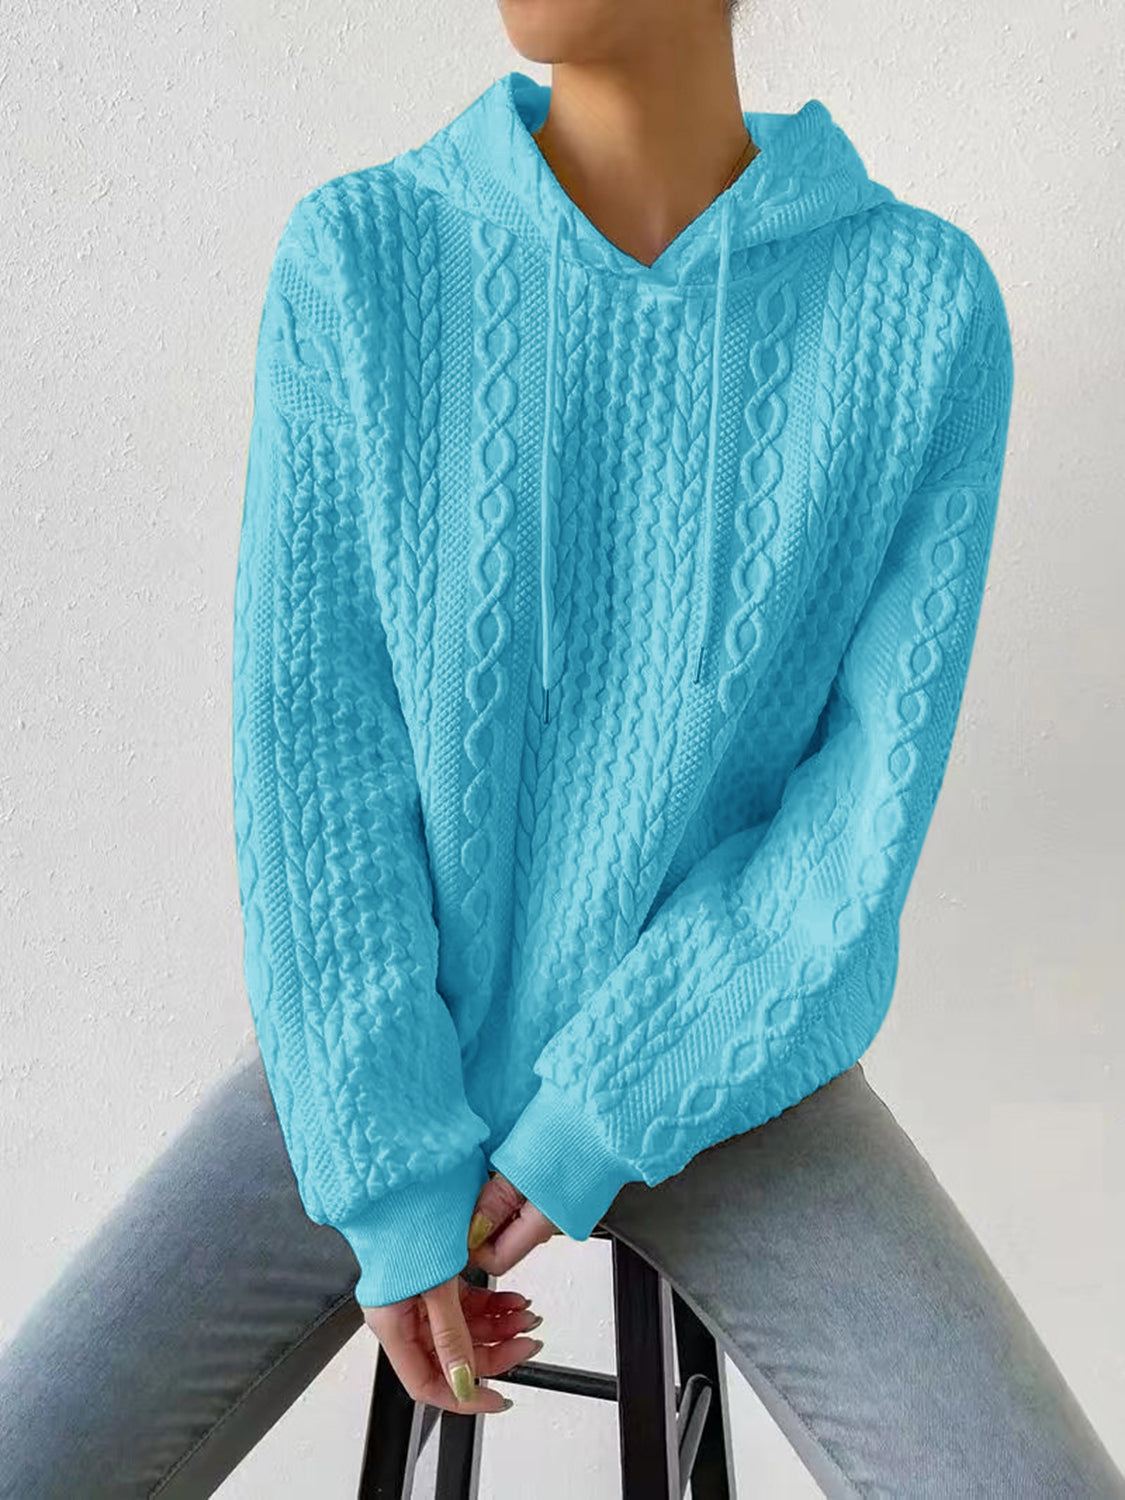 Textured Drawstring Long Sleeve Hoodie - Teal / S - Women’s Clothing & Accessories - Shirts & Tops - 28 - 2024